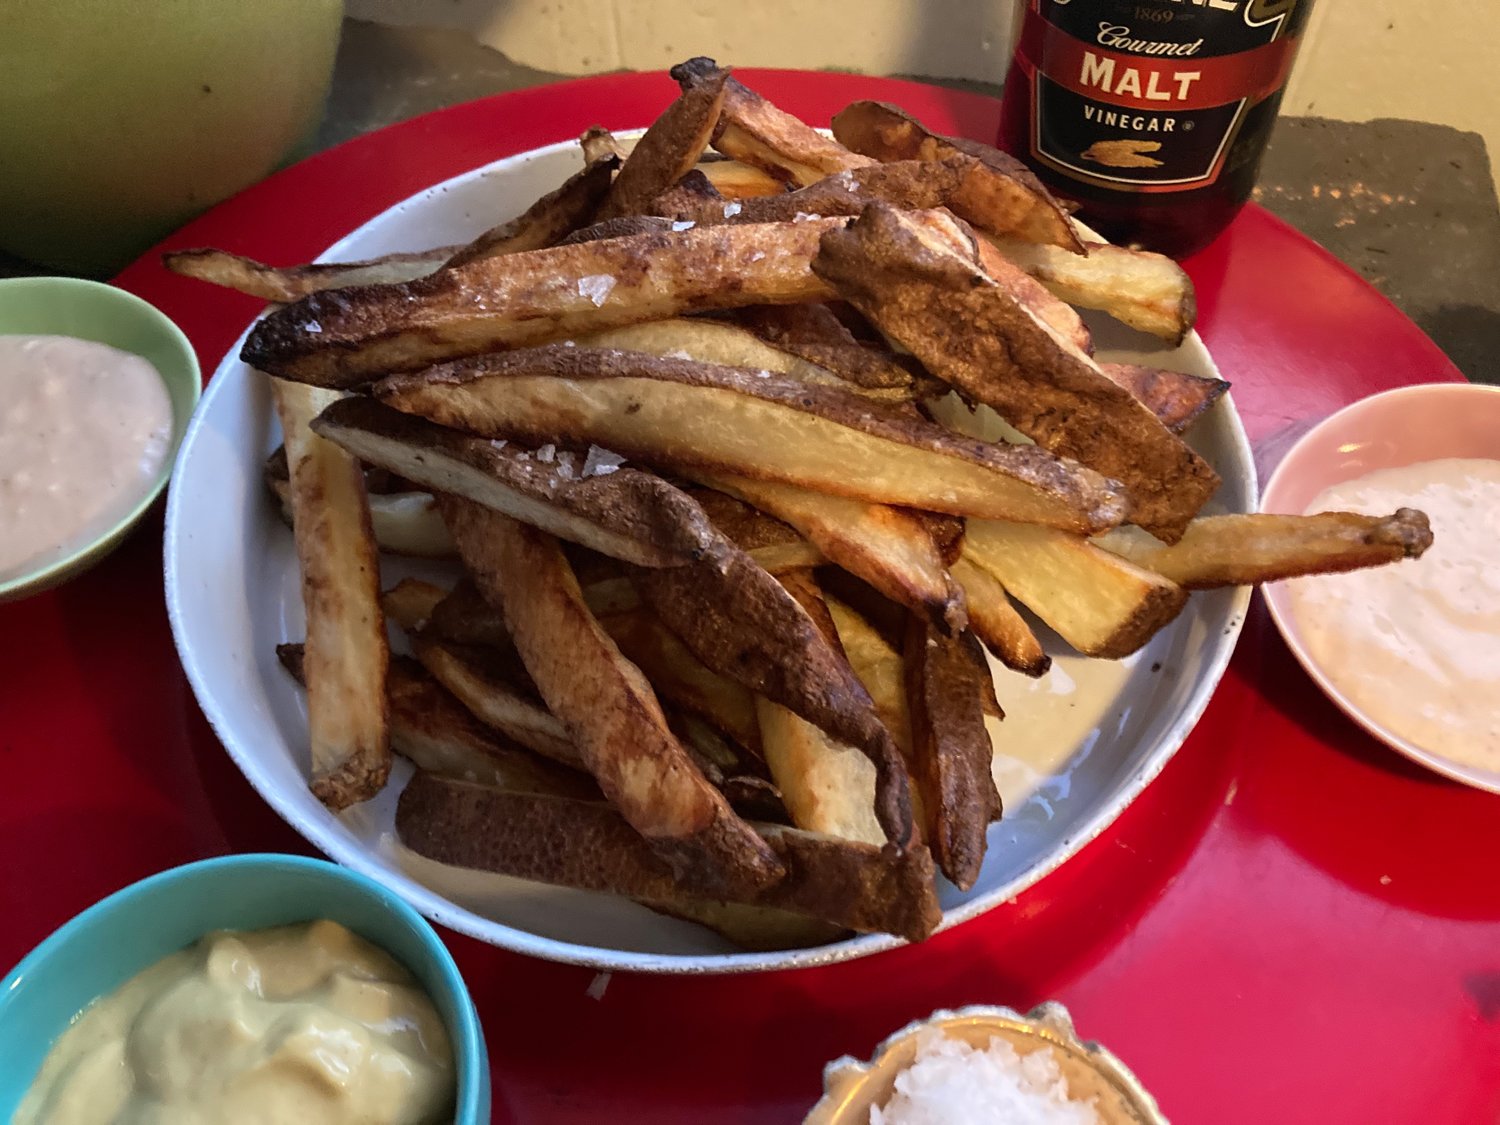 Cut into thin strips, these oven-fried potatoes are delicious on their own with a dash of salt, or with Dijon mustard, malt vinegar or a mix of ketchup, mayonnaise and horseradish.